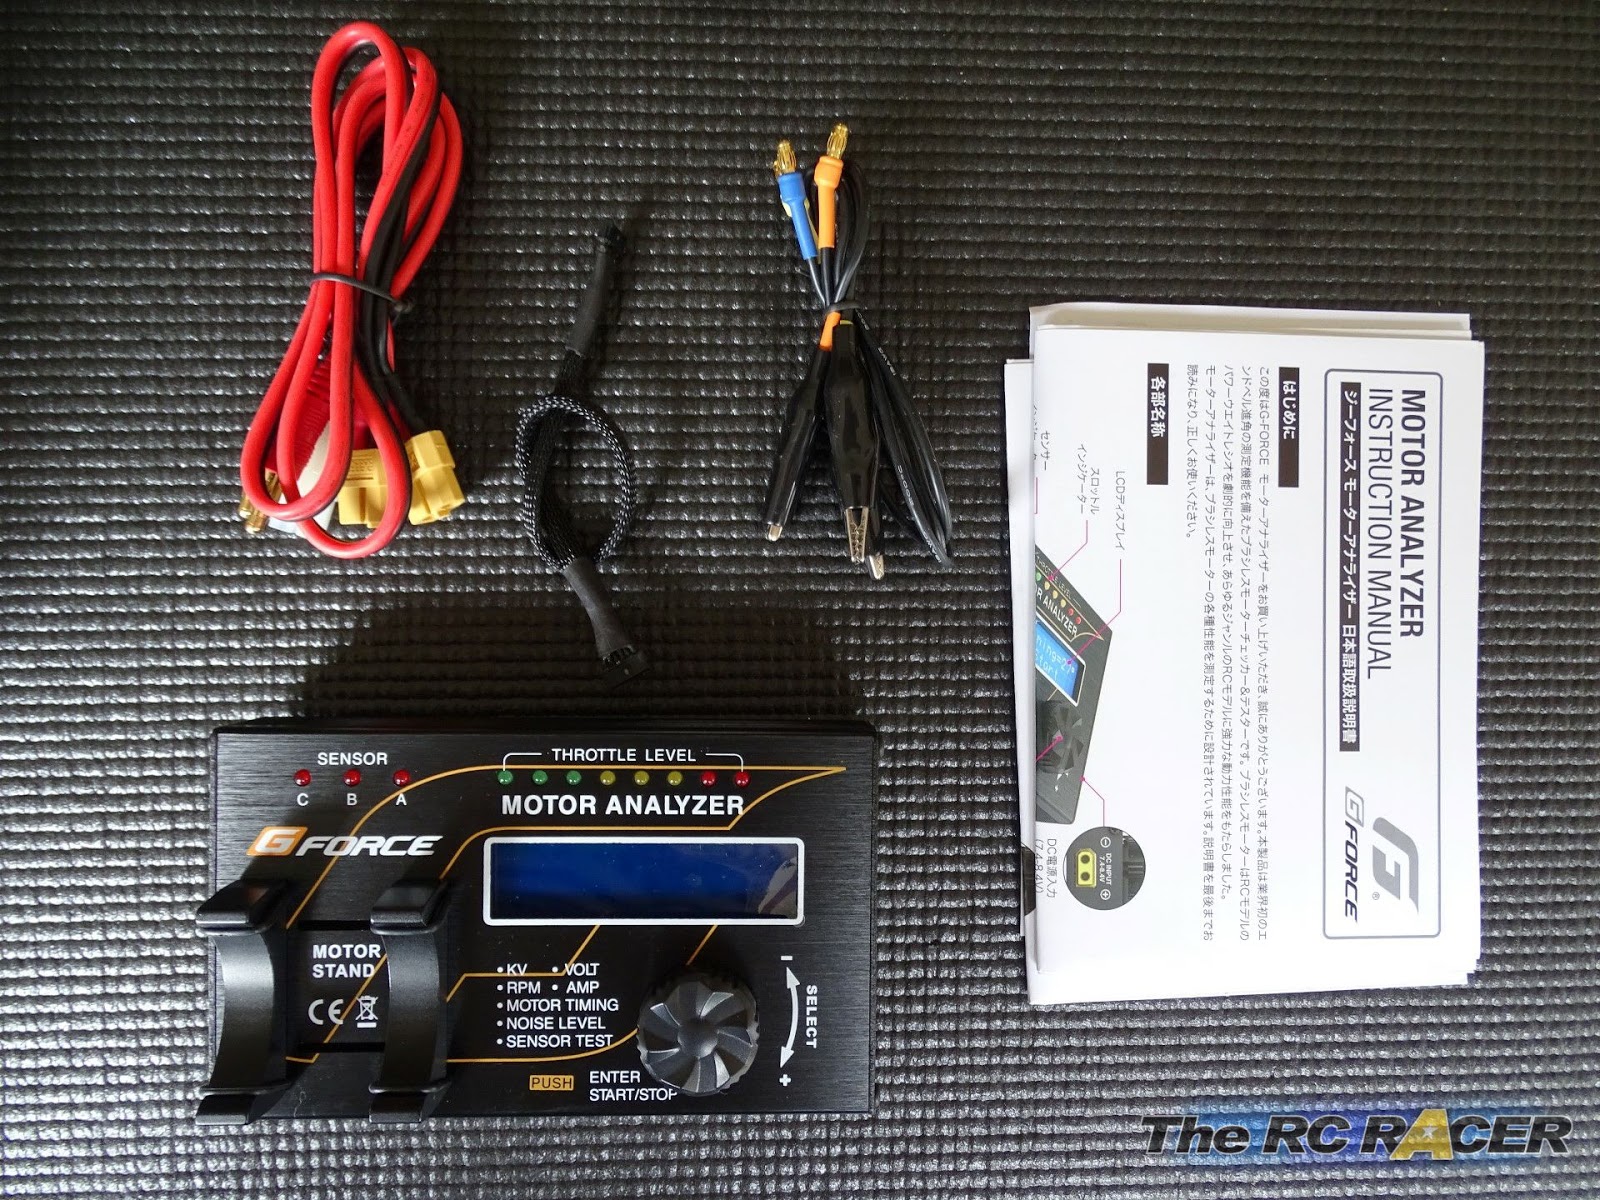 G Force Brushless Motor Analyzer Review and Tuning tips | The RC Racer